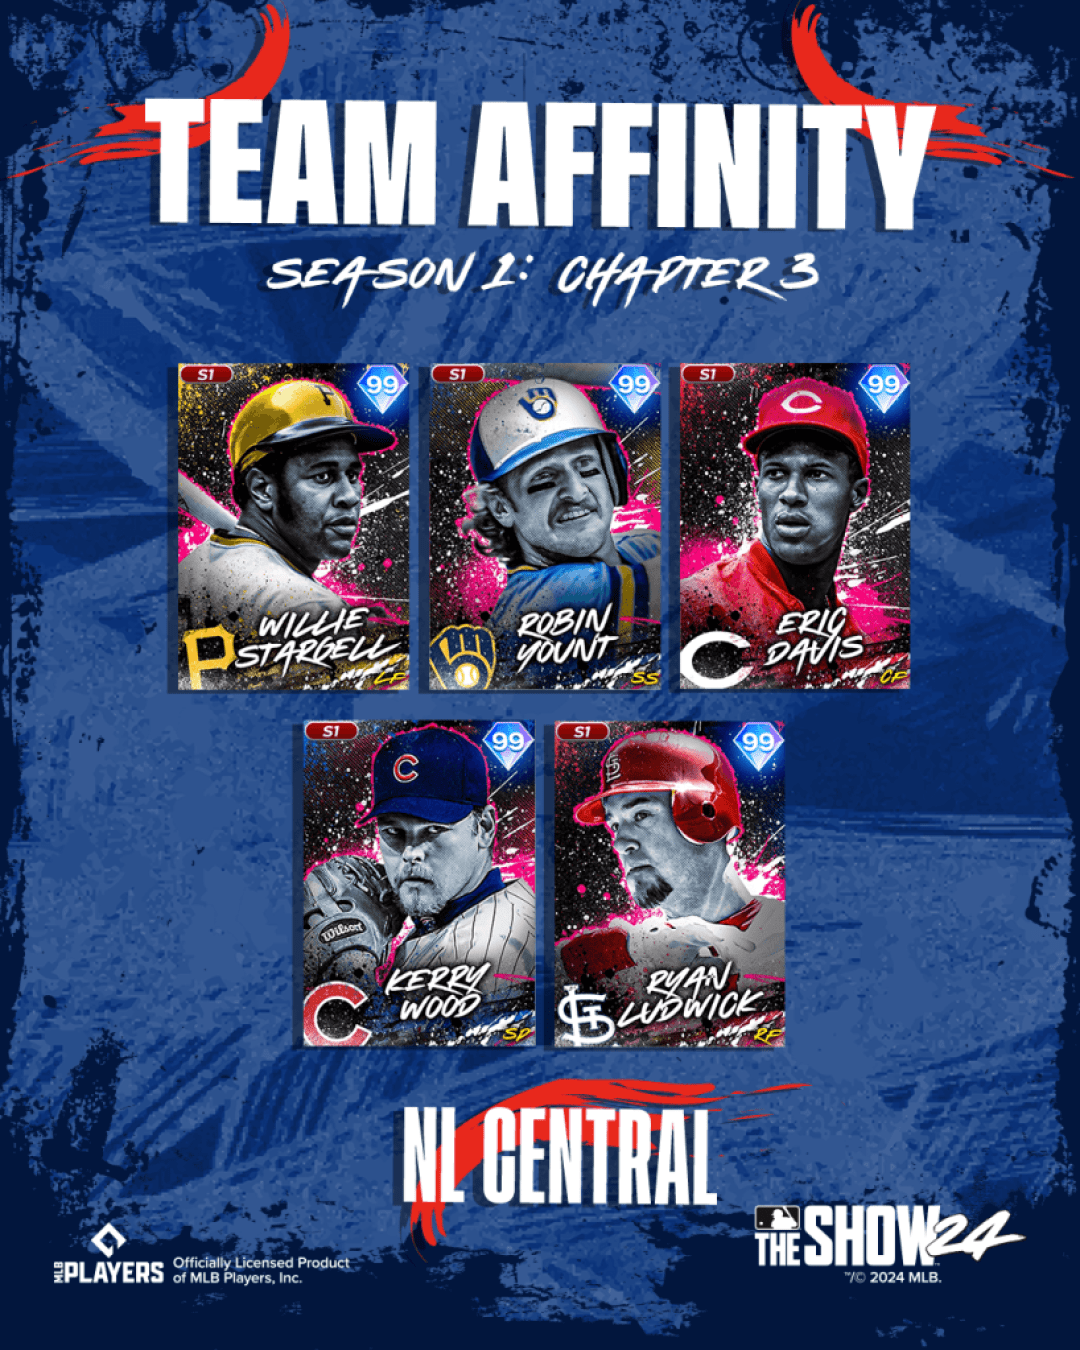 NL Central Team Affinity Season 1: Chapter 3 cards in MLB The Show 24